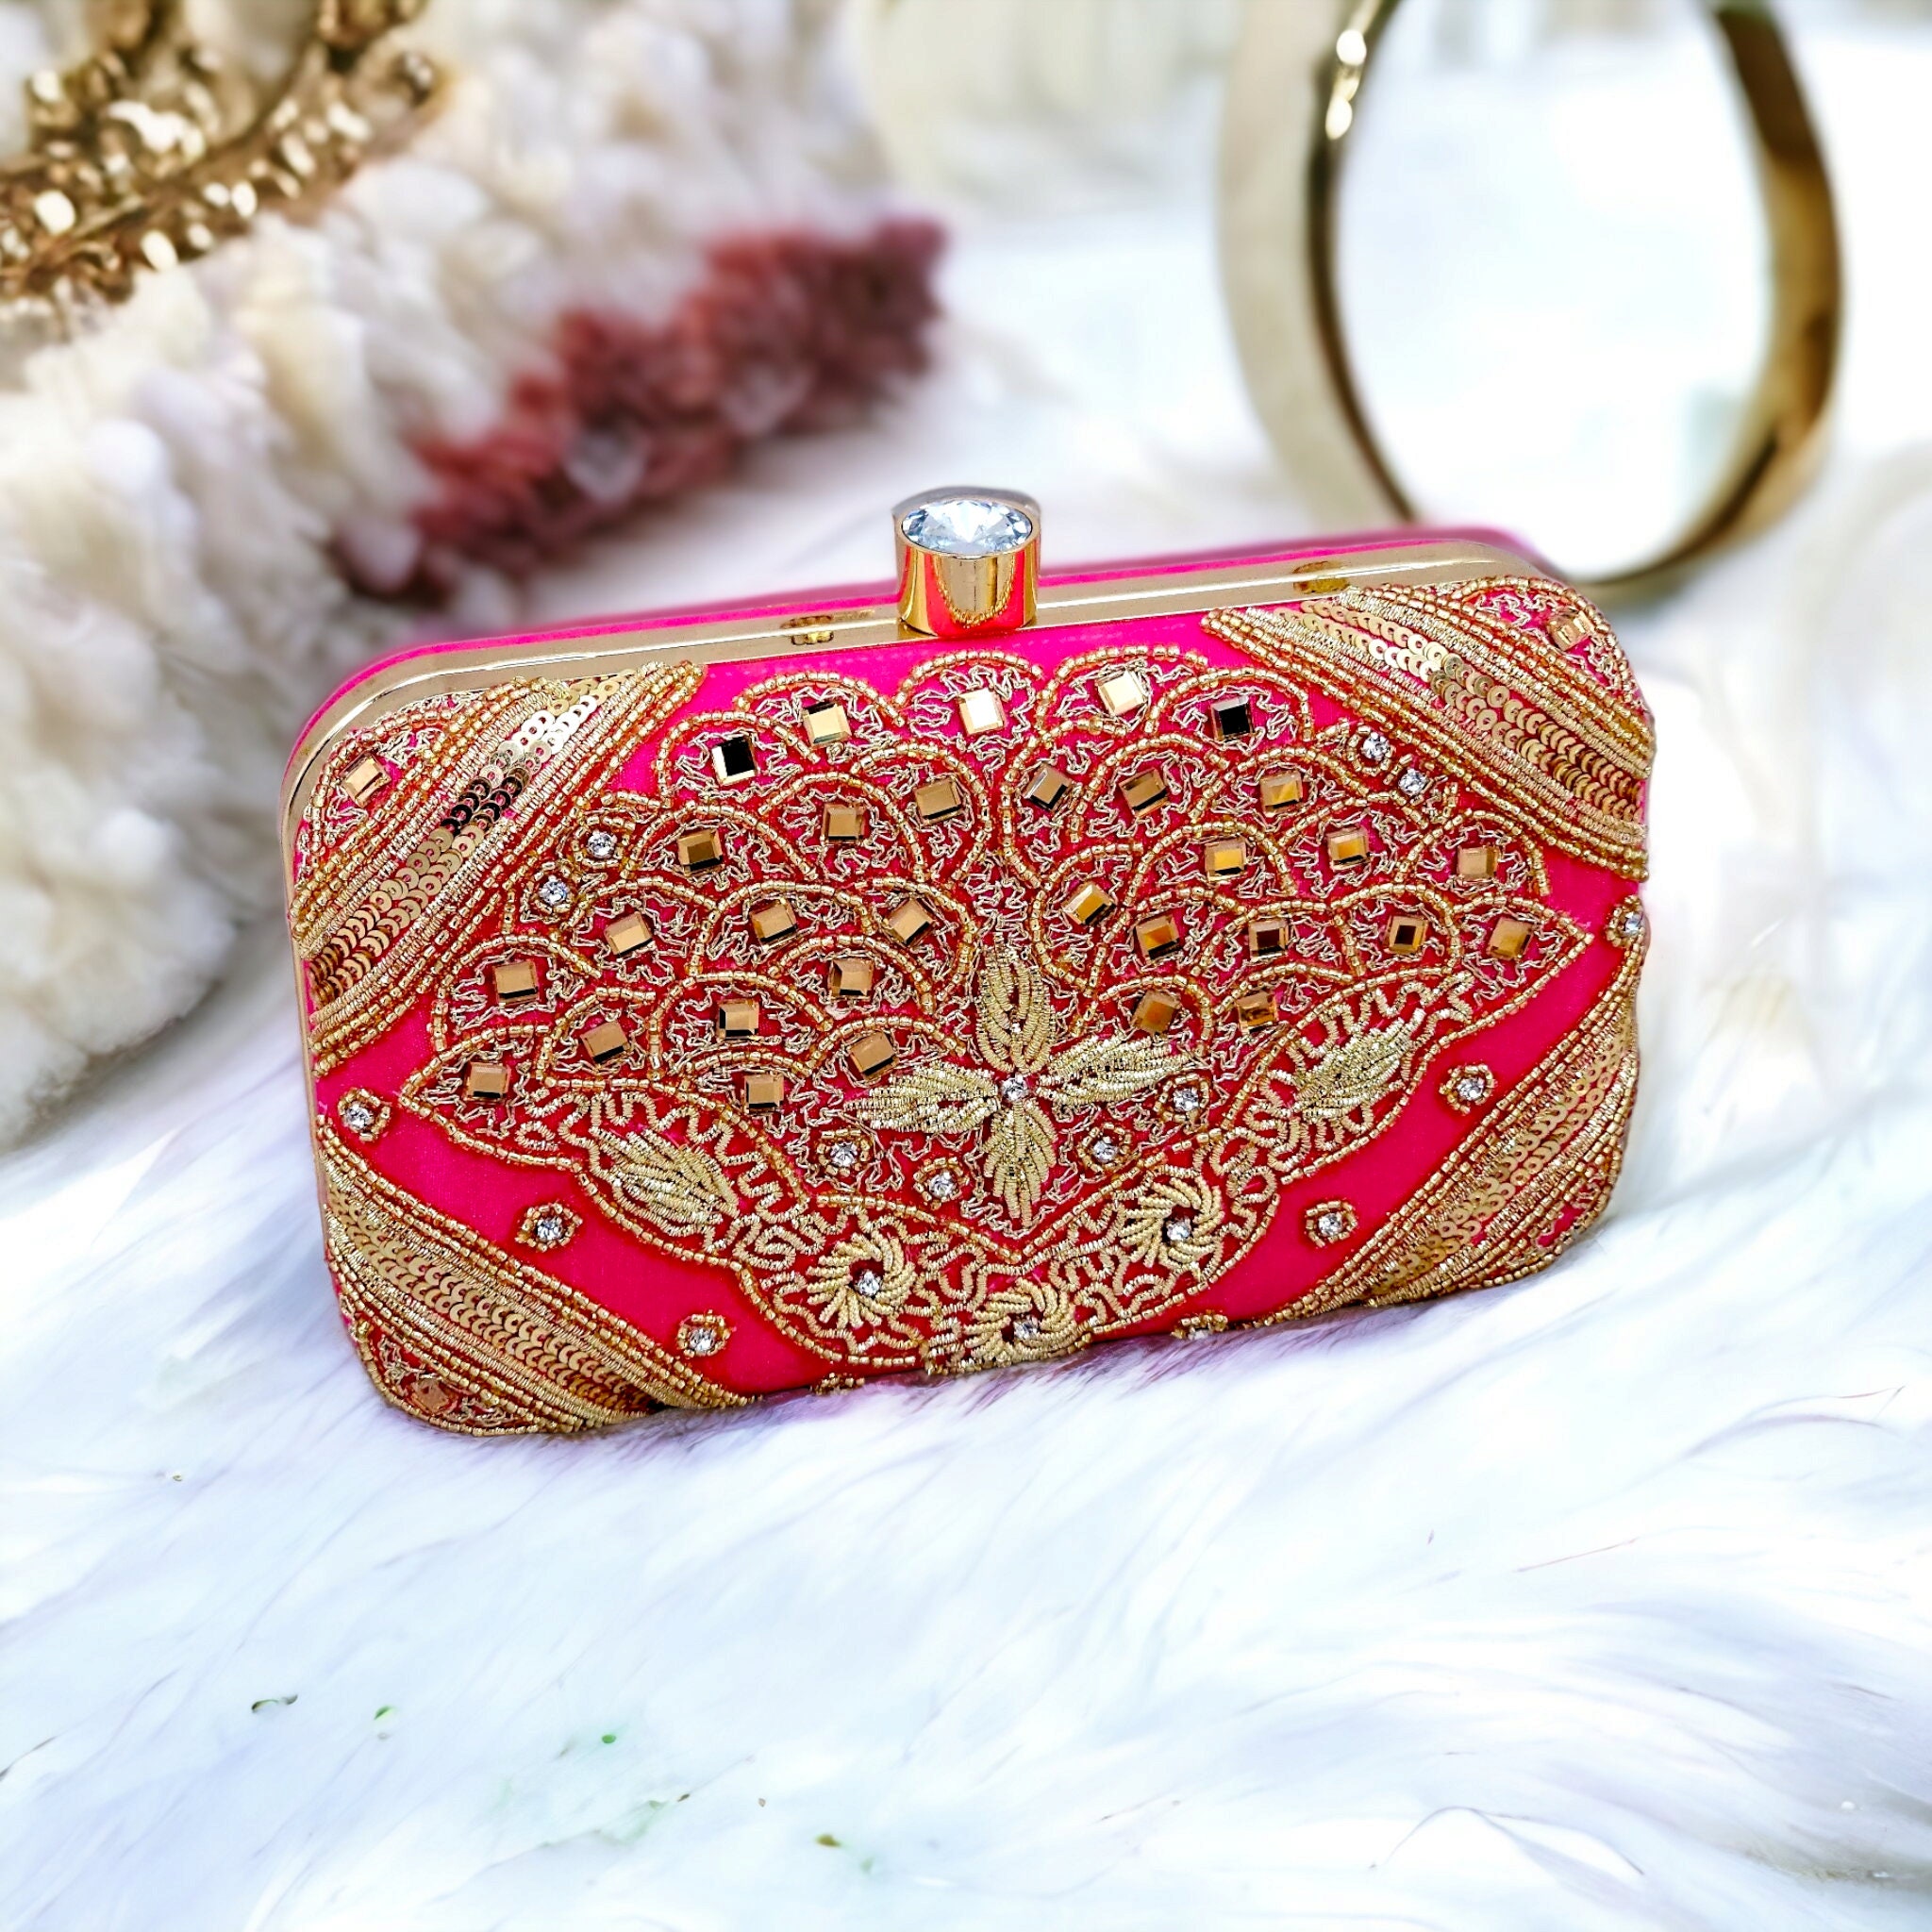 Amrapali Jewels - The hottest wedding accessory of the season is here, and  we are drooling - our traditional silver bag with enamel and jadau work.  #AmrapaliJewels #FestiveAccessories #Handclutch #Sparkling #WeddingSeason  #SilverBag #